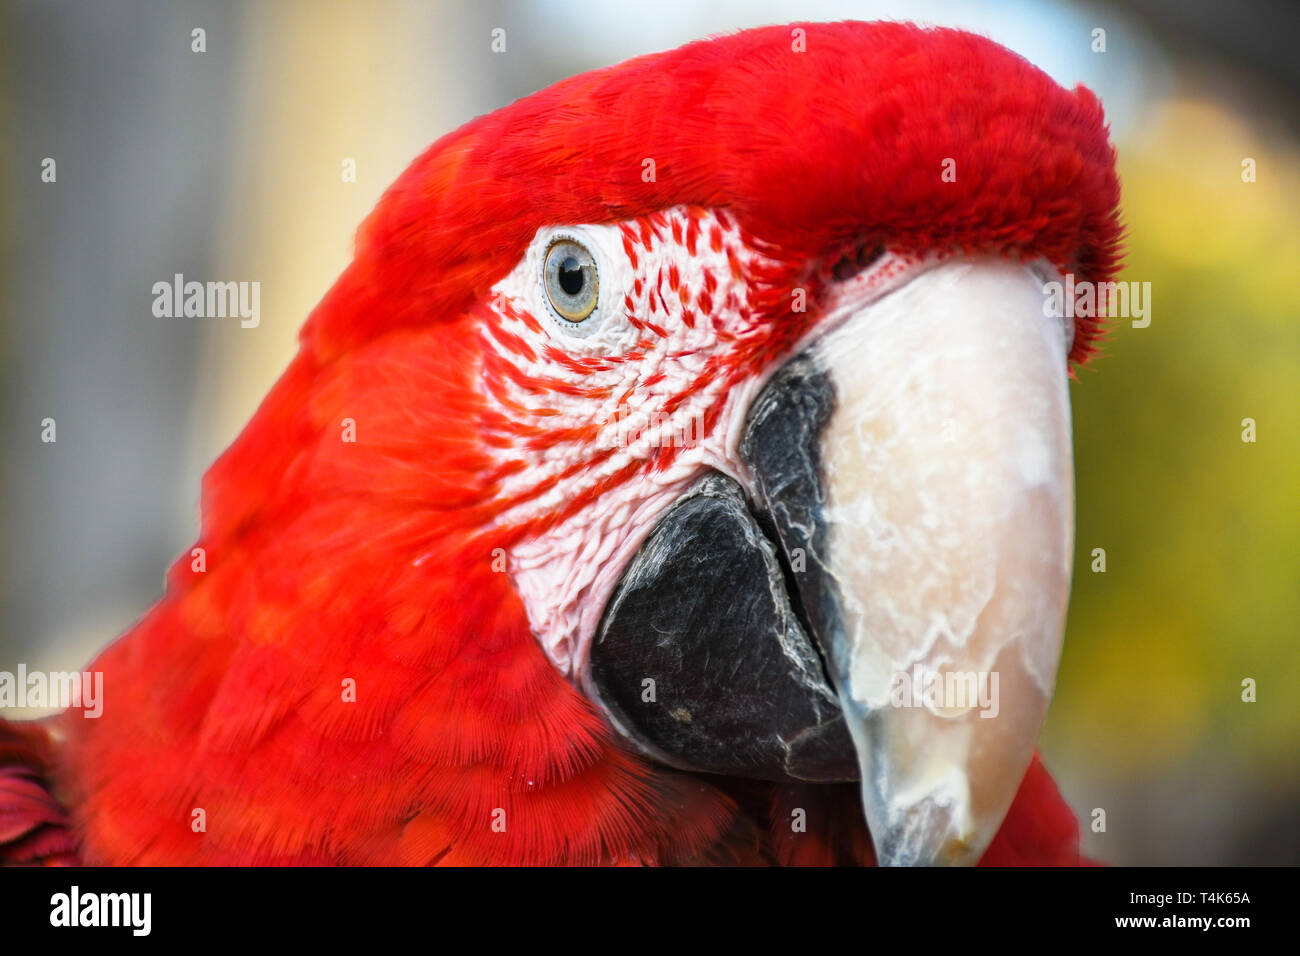 Close up head shoot portrait of an colorful parrot green wing scarlet Macaw Stock Photo